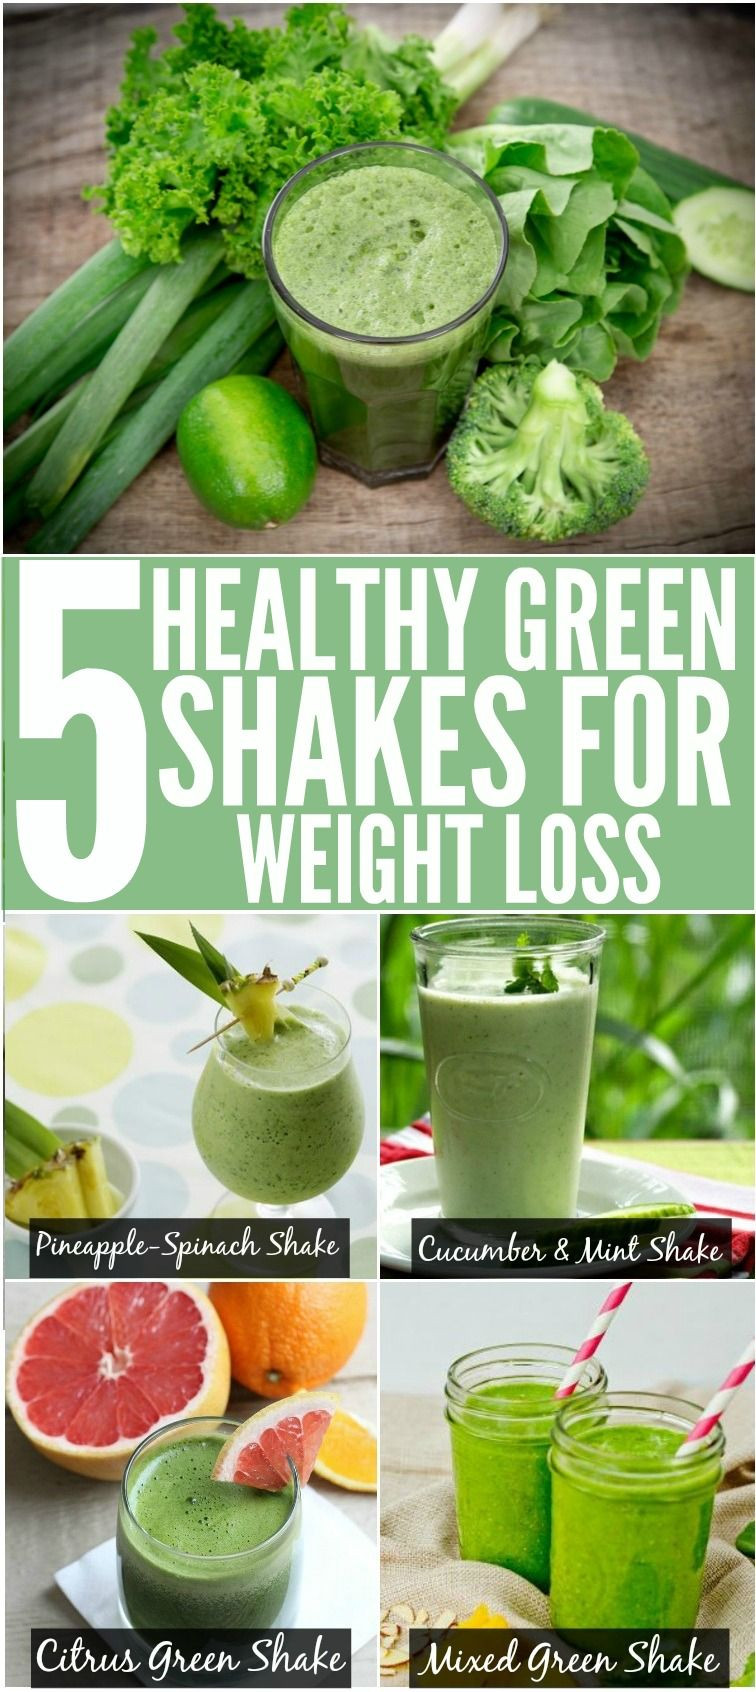 Healthy Fruit And Vegetable Smoothie Recipes For Weight Loss
 Pin on Weight Loss Tips & Detox